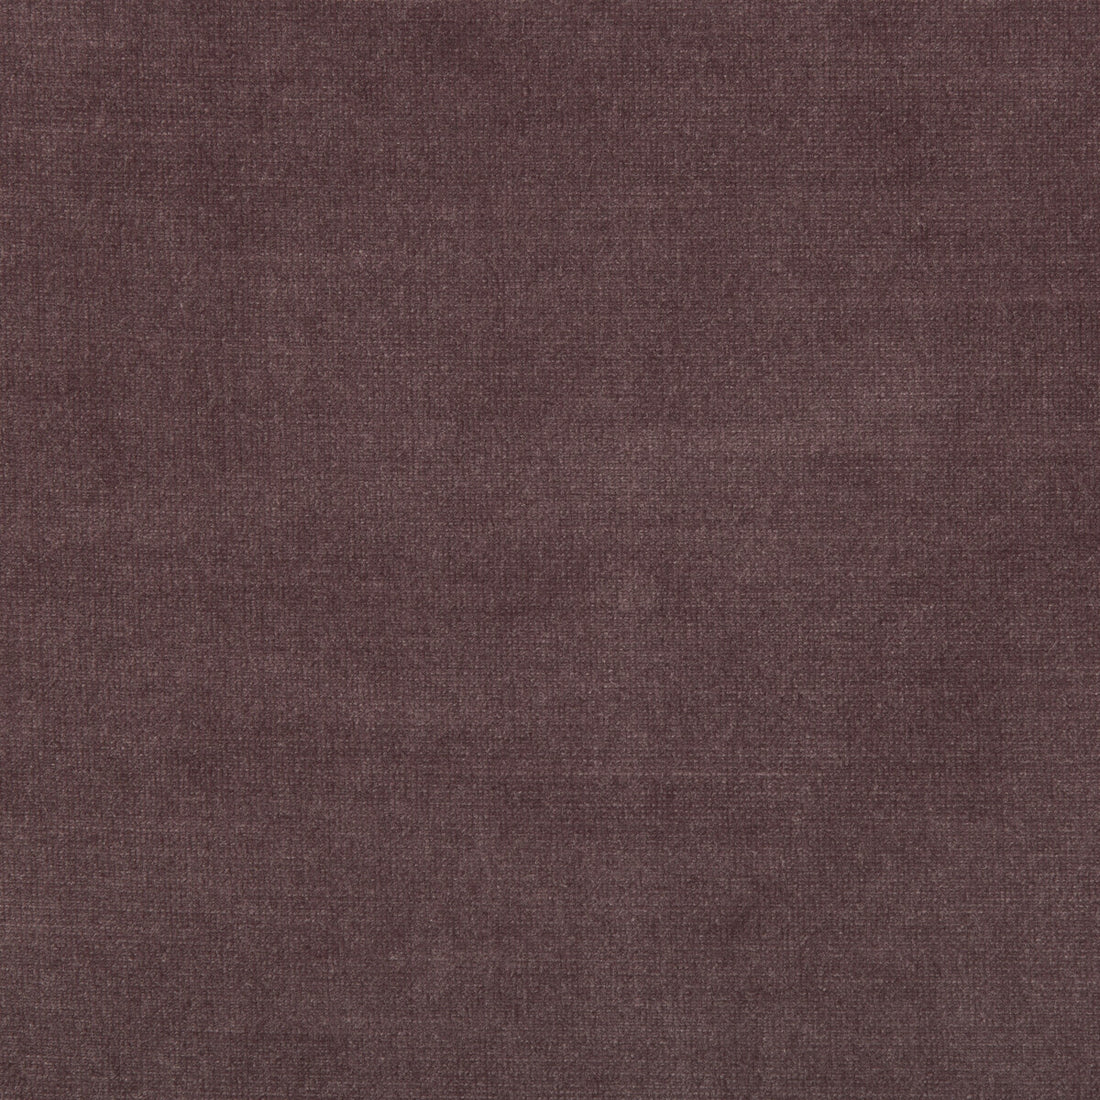 Chessford fabric in plum color - pattern 35360.110.0 - by Kravet Smart in the Performance collection